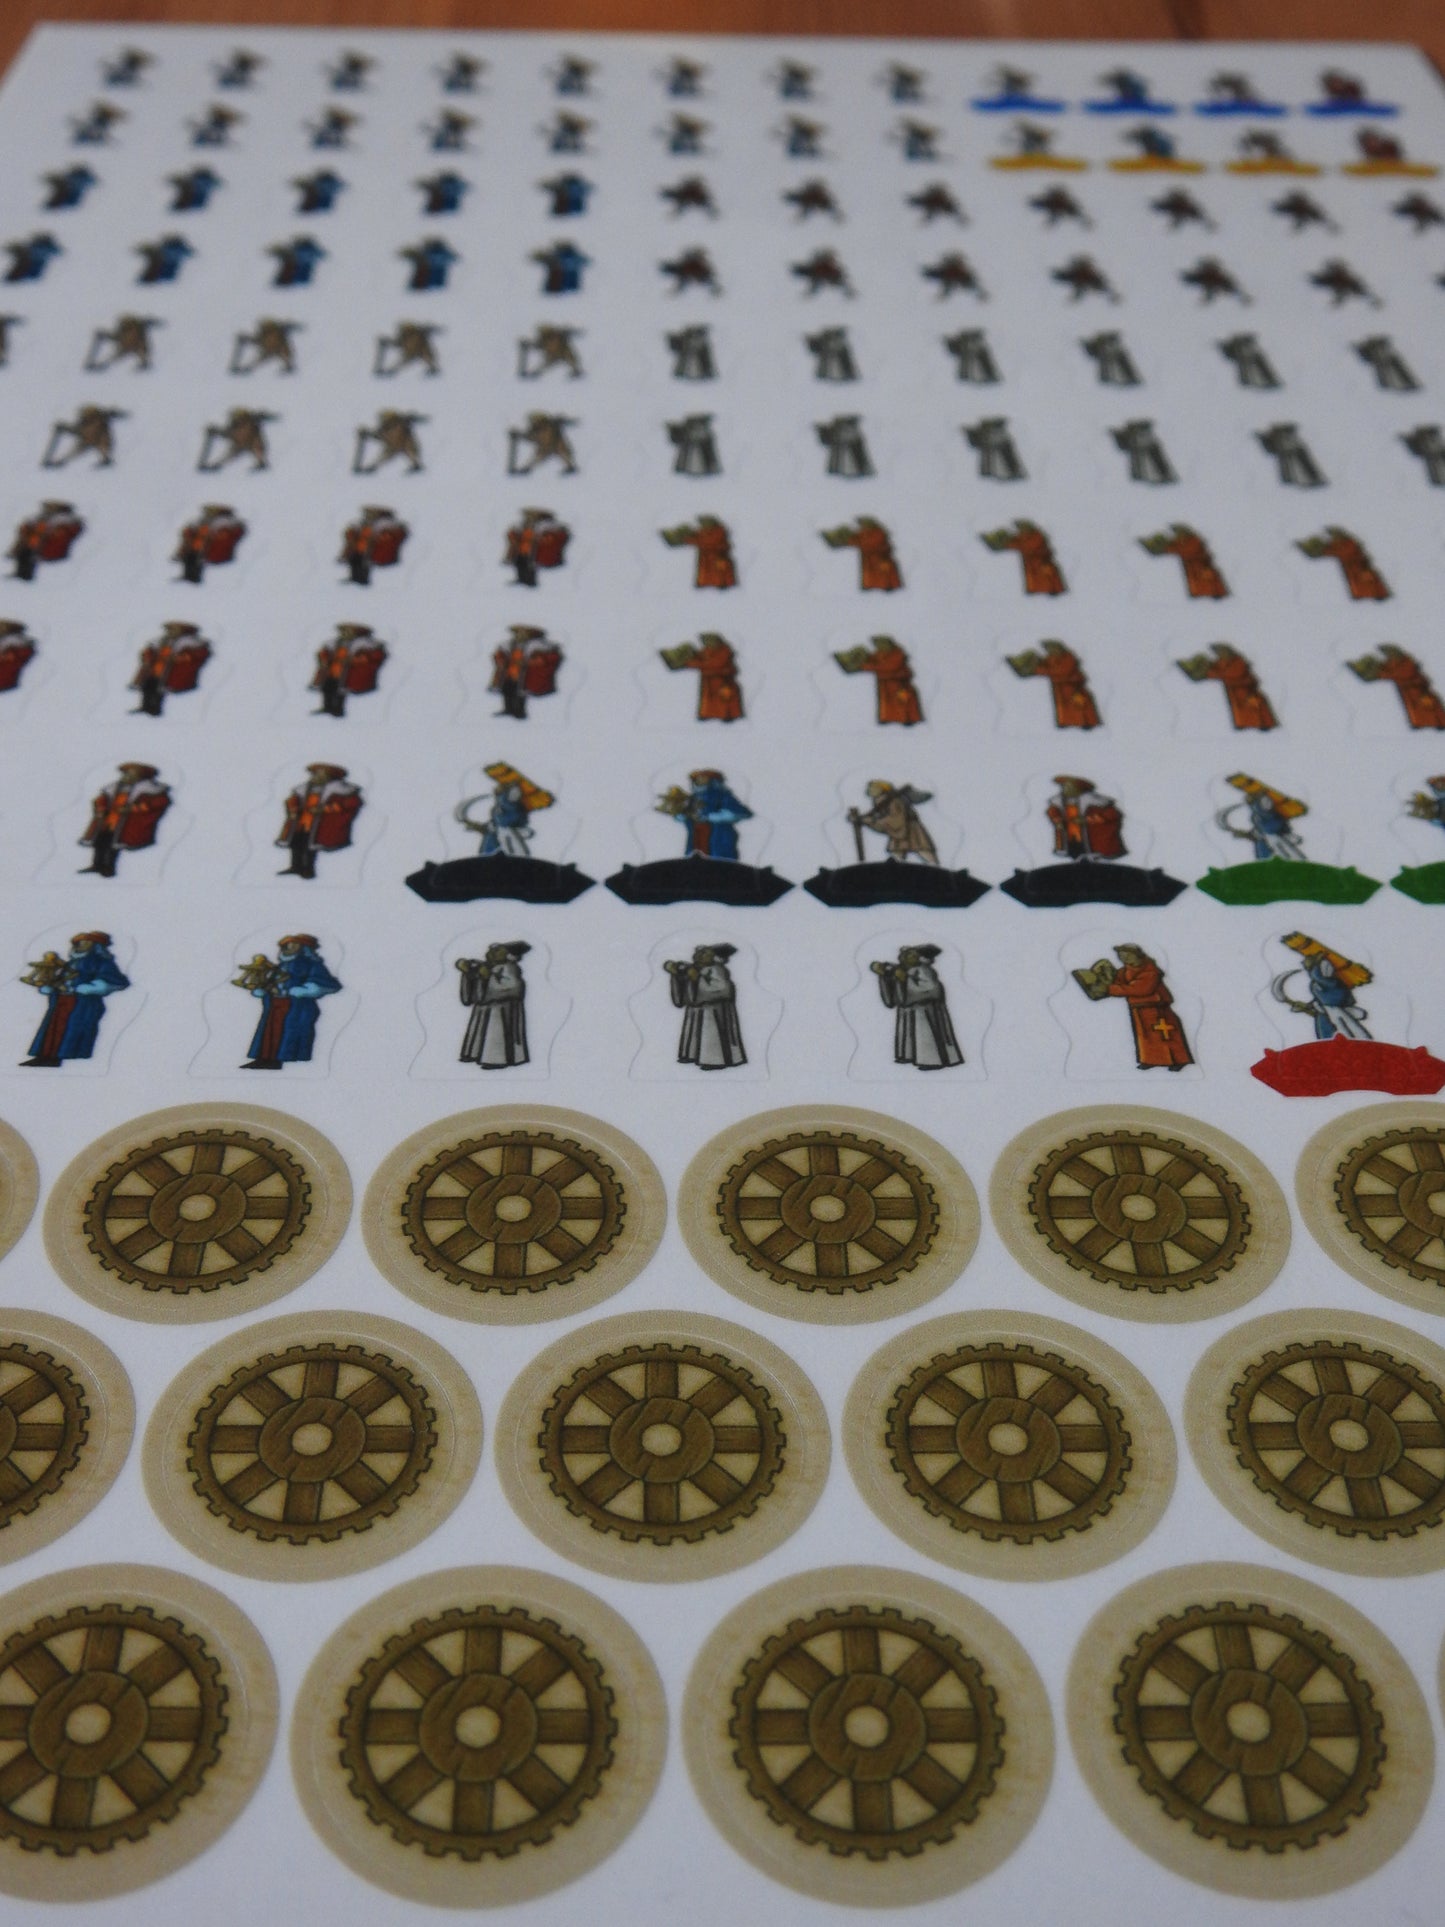 View of one of the sticker sheets, showing various characters from the game.